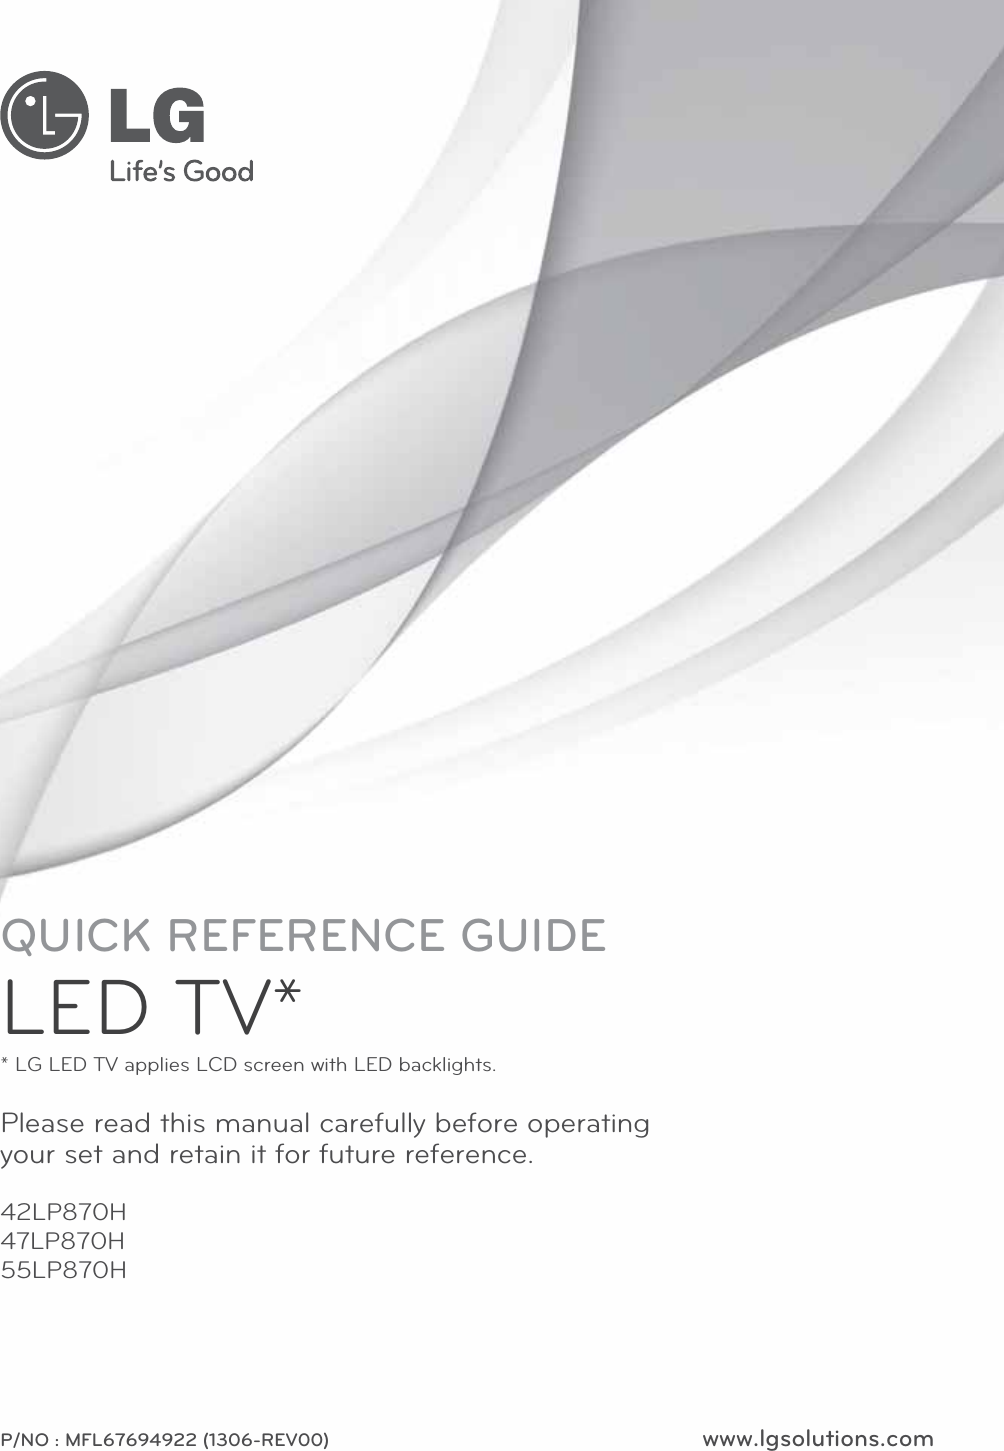 www.lgsolutions.comP/NO : MFL67694922 (1306-REV00)42LP870H47LP870H55LP870HPlease read this manual carefully before operating your set and retain it for future reference.QUICK REFERENCE GUIDELED TV** LG LED TV applies LCD screen with LED backlights.